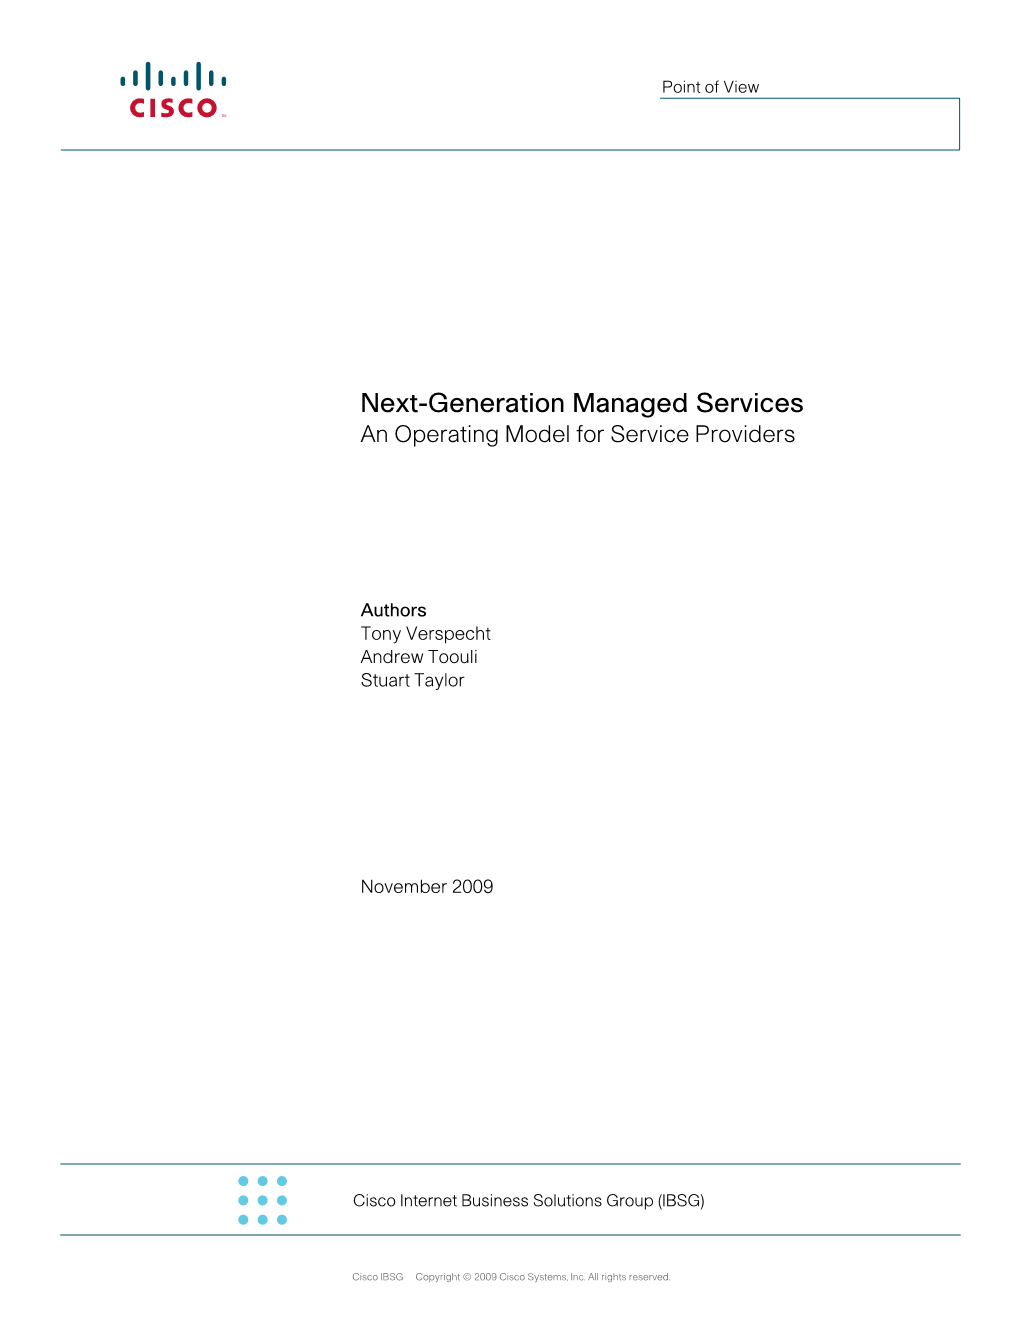 Next-Generation Managed Services an Operating Model for Service Providers